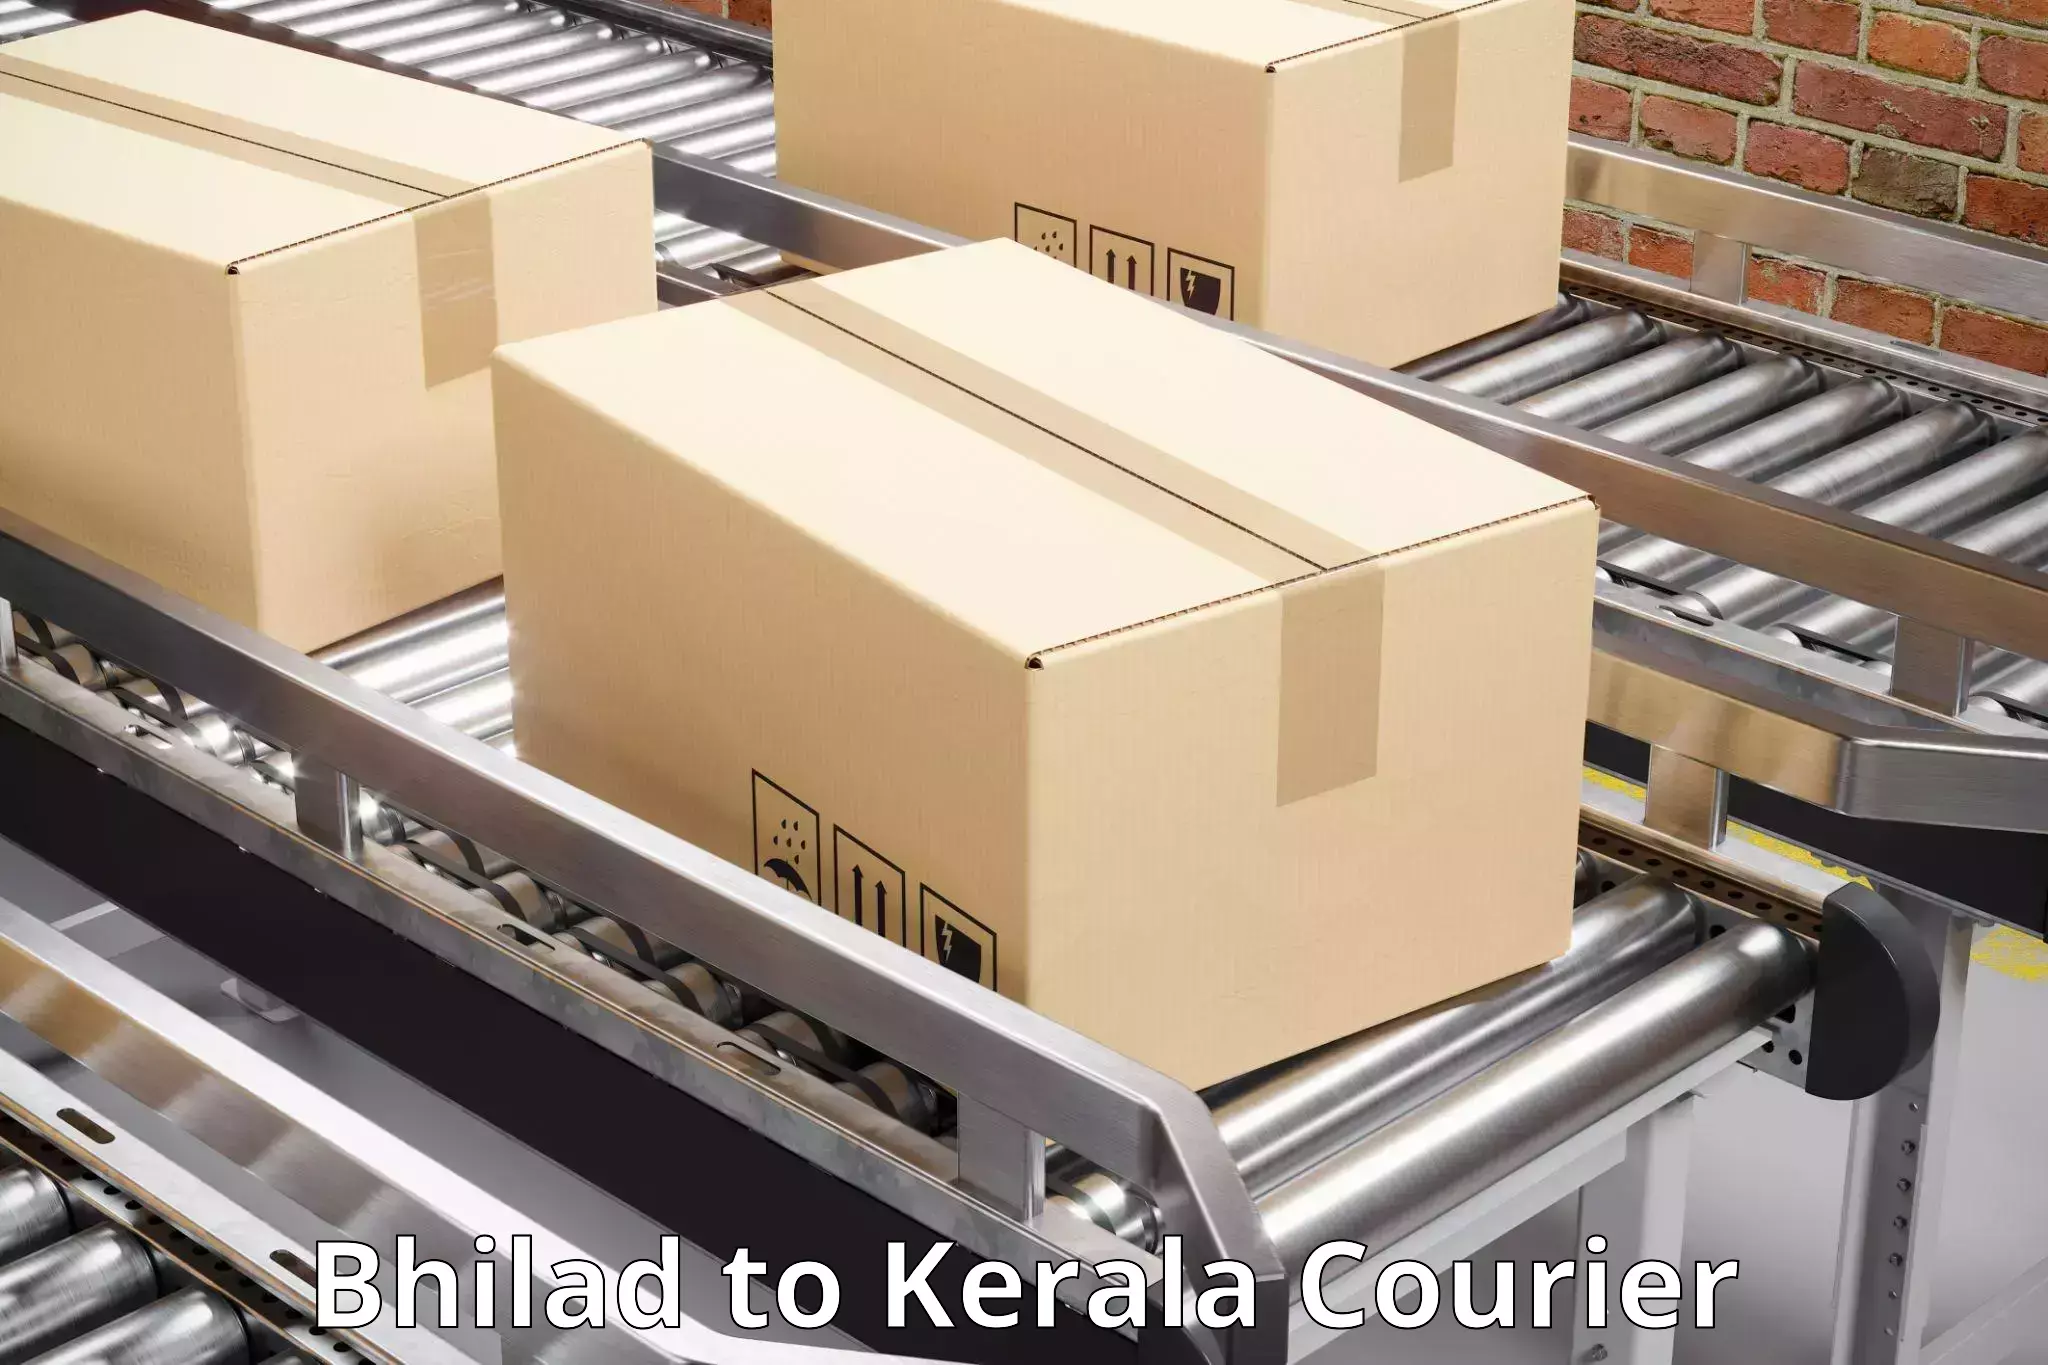 Parcel service for businesses in Bhilad to Koothattukulam